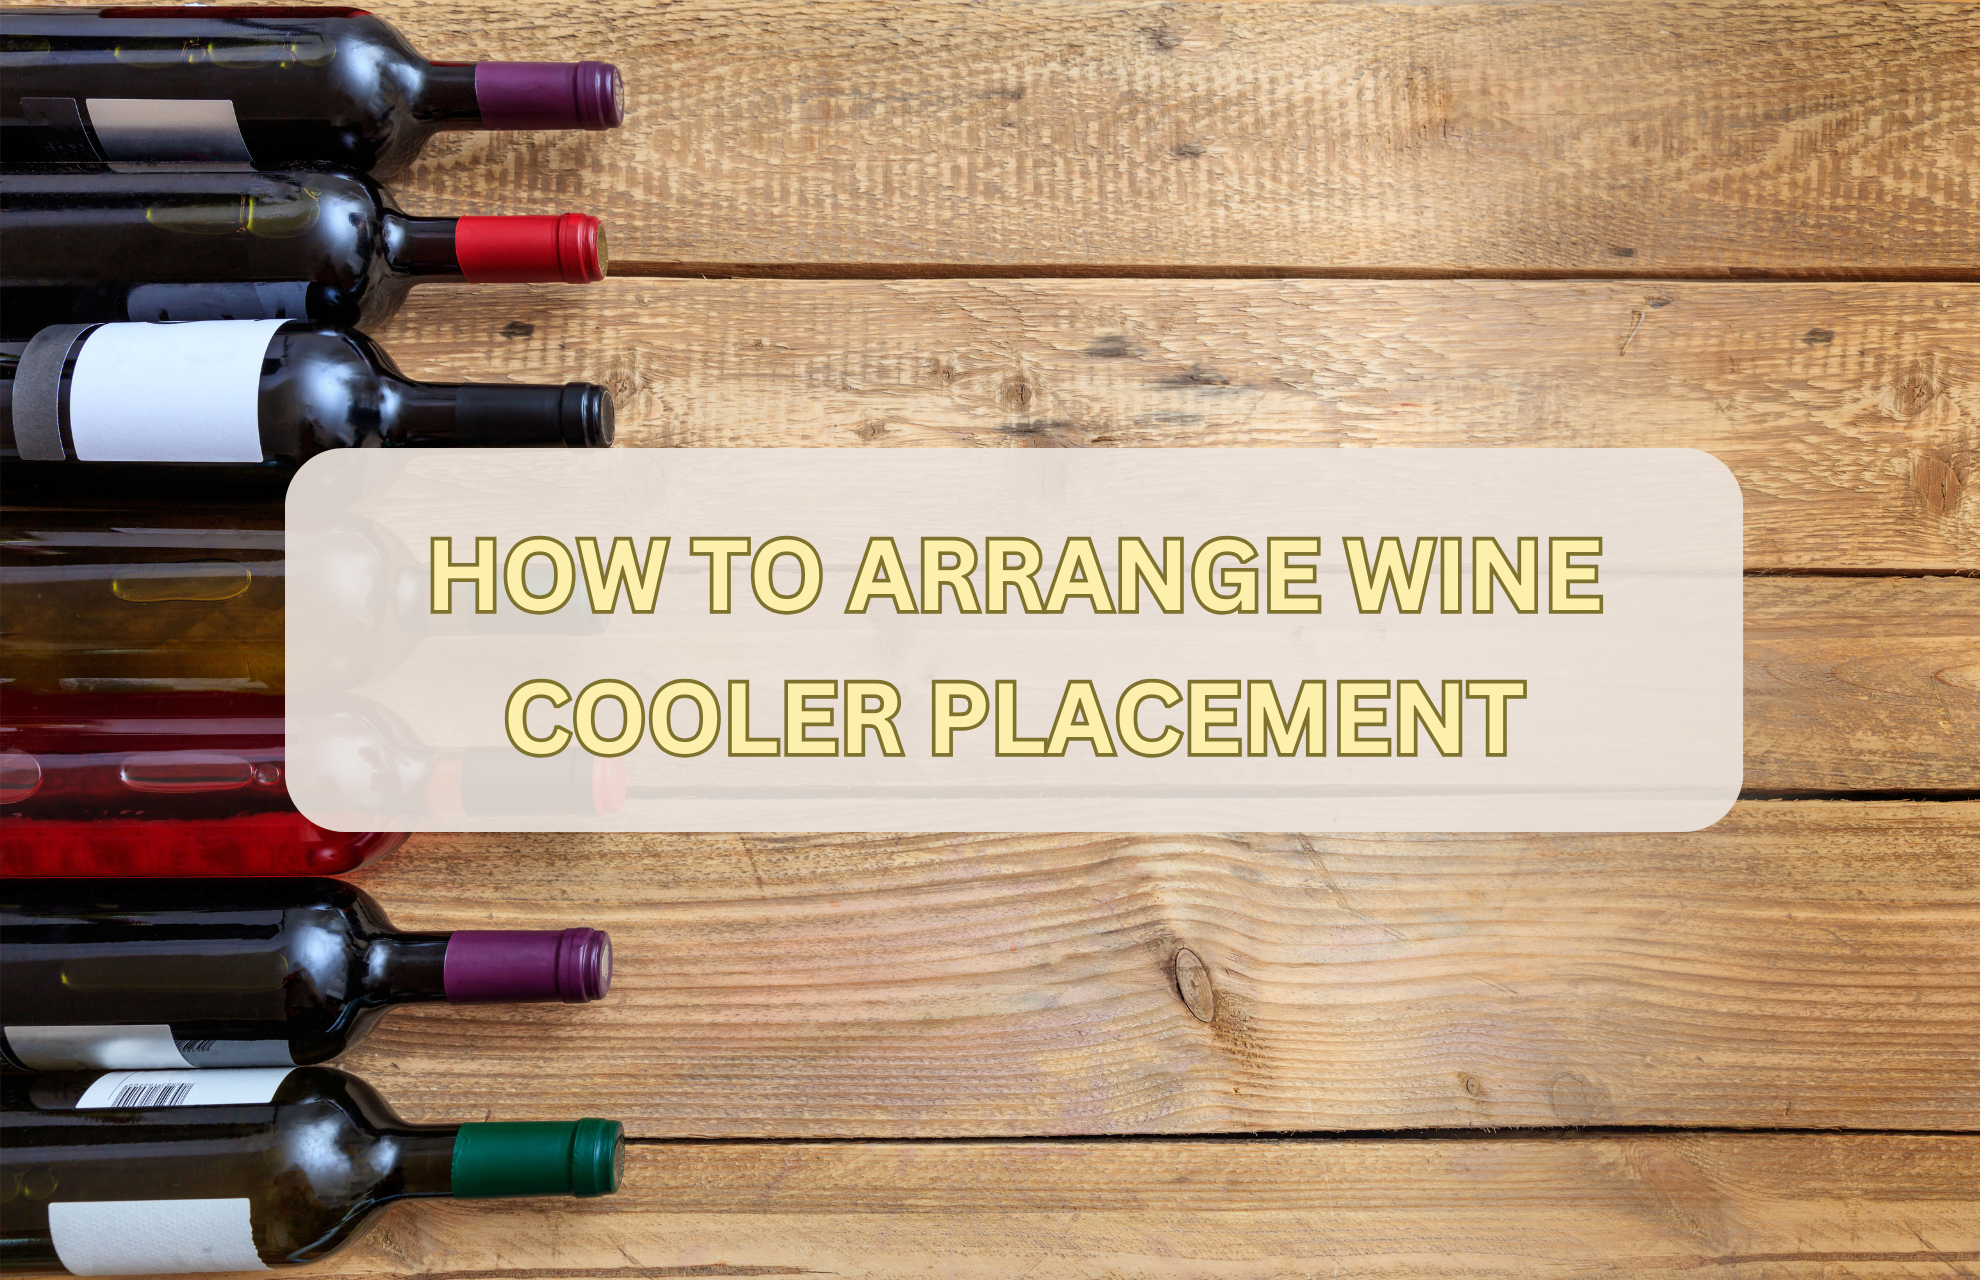 HOW TO ARRANGE WINE COOLER PLACEMENT